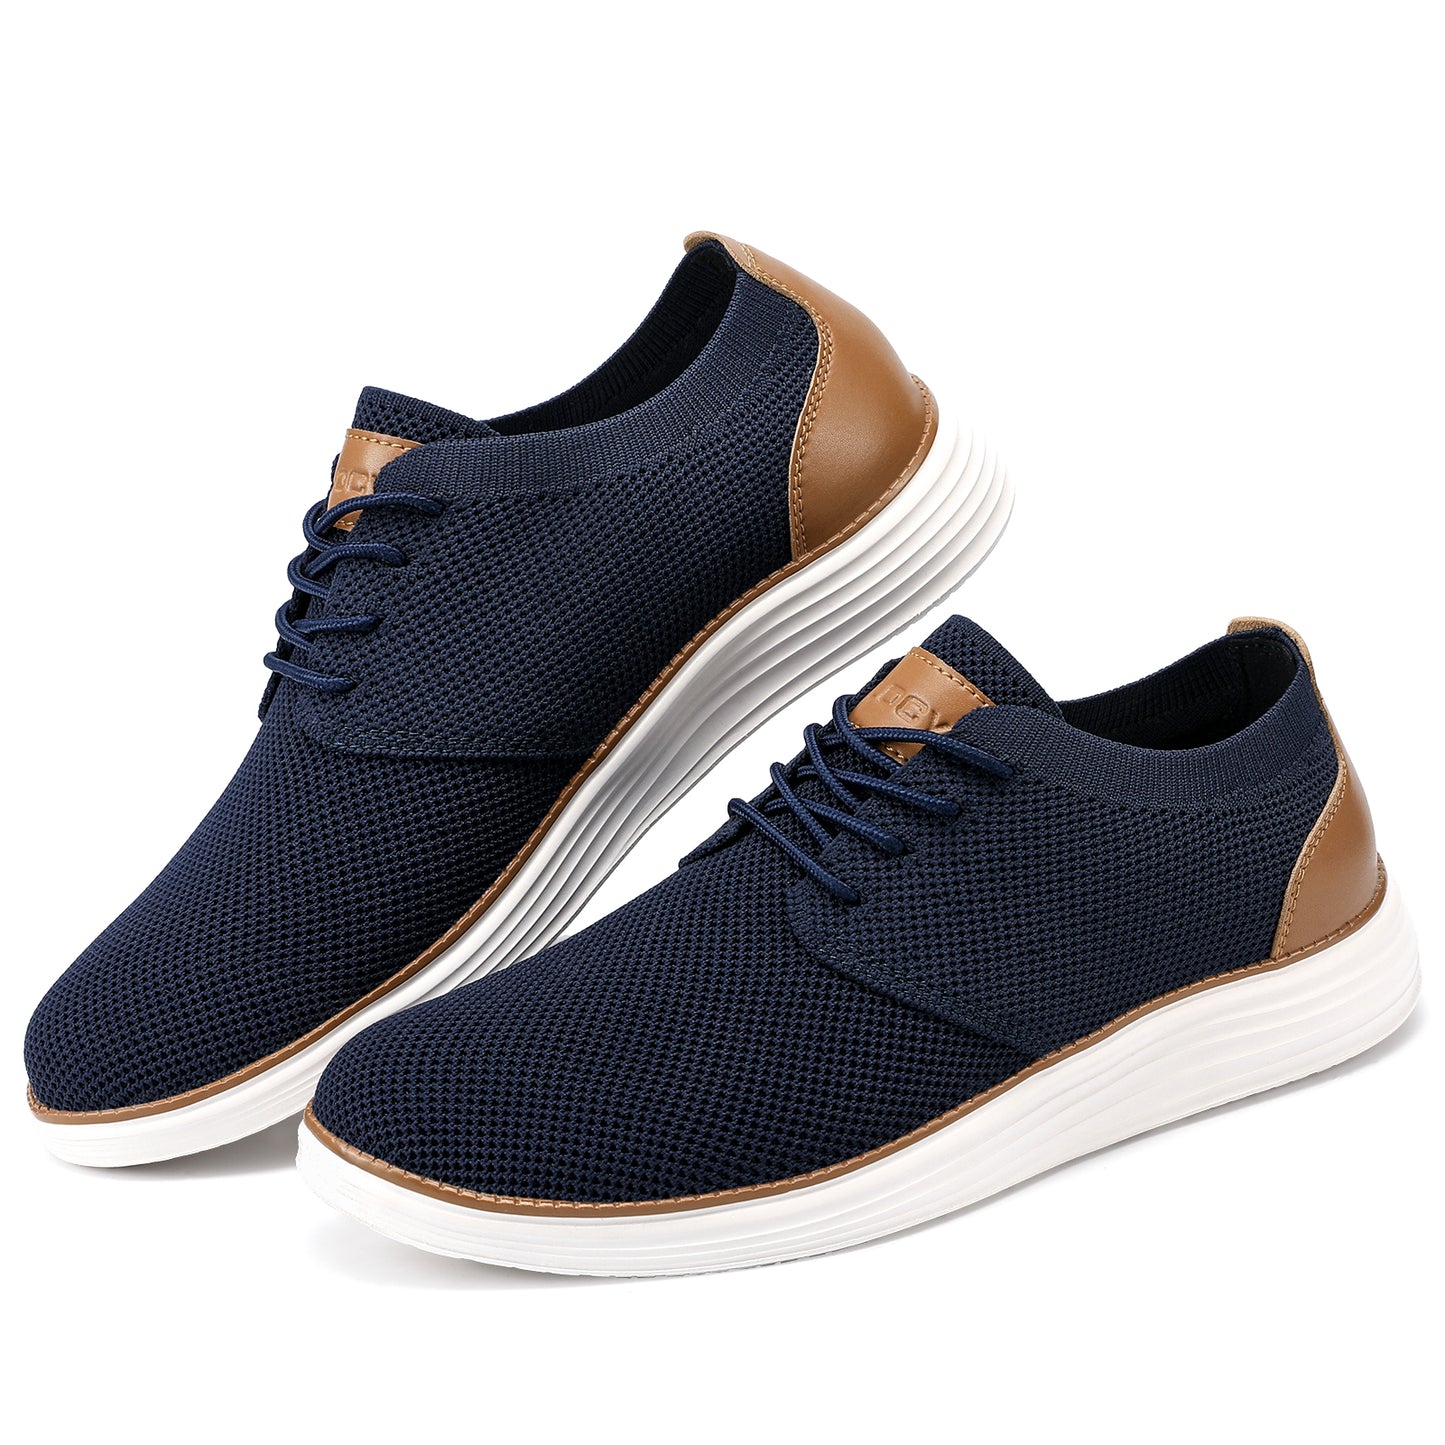 Men's Lace Up elastic collar Fashion Dress Sneakers  Business Oxfords Comfortable Breathable Lightweight Casual Walking Shoes